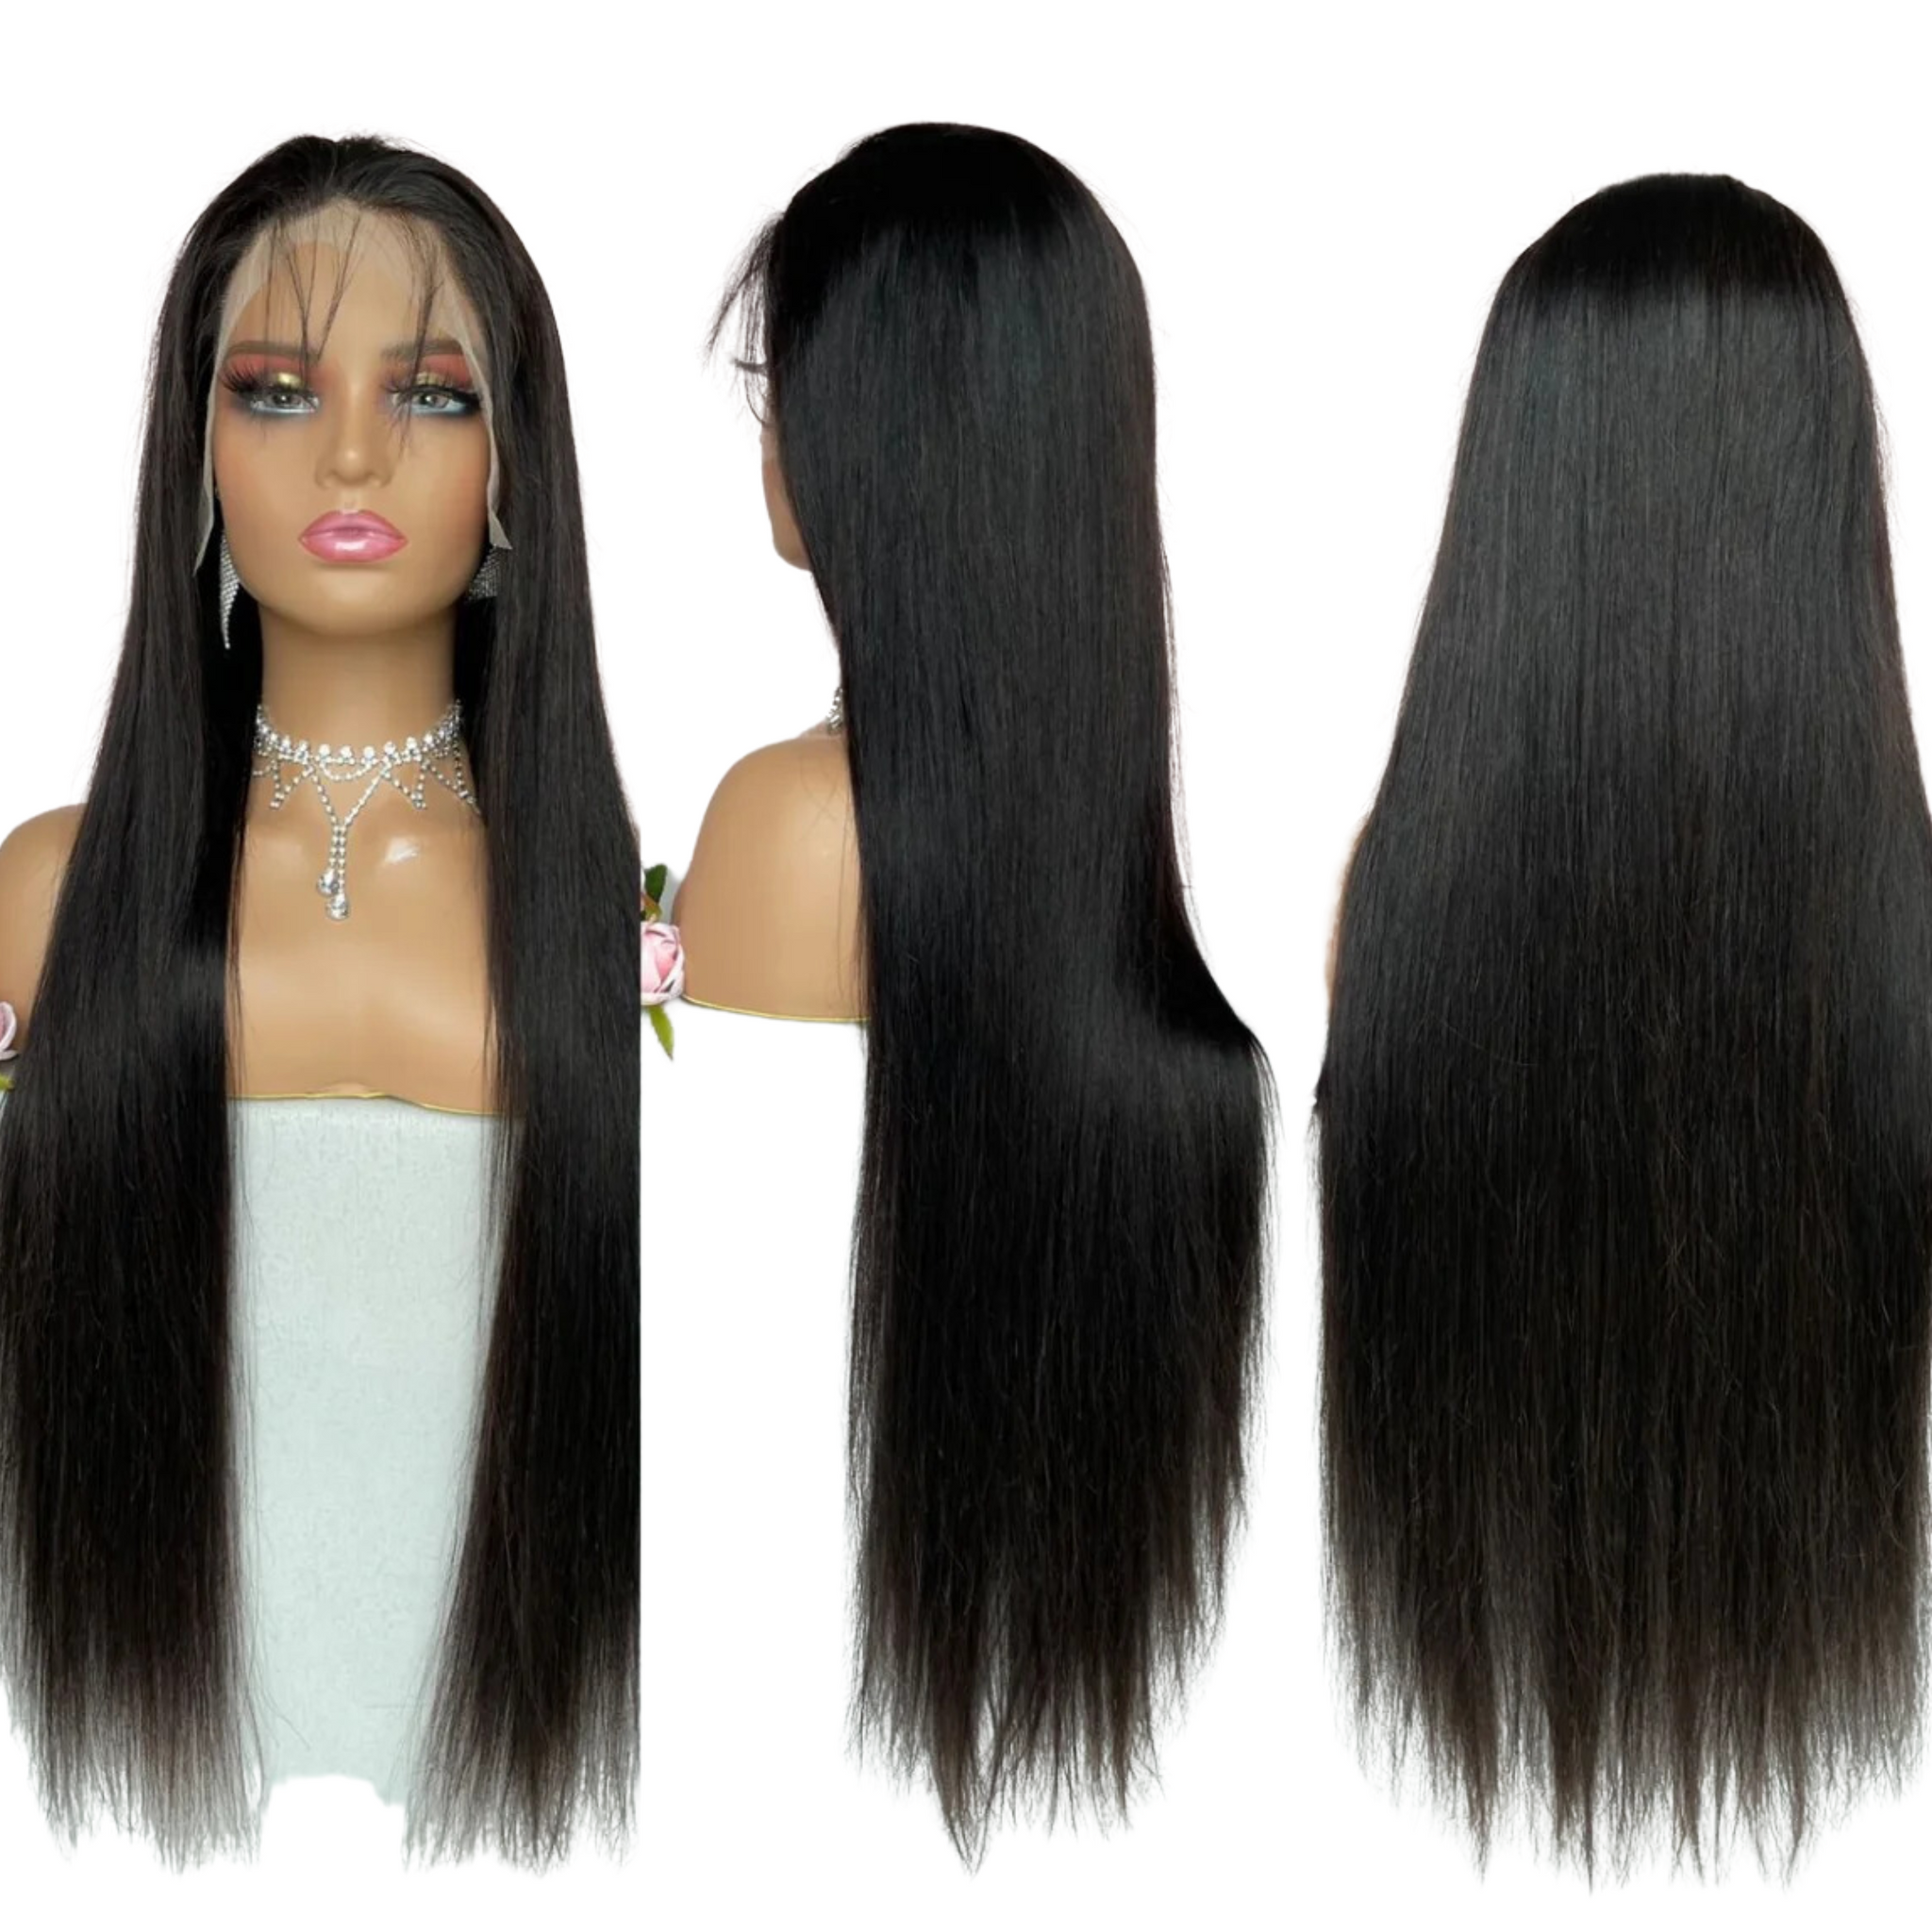 13x4 frontal wig 26''